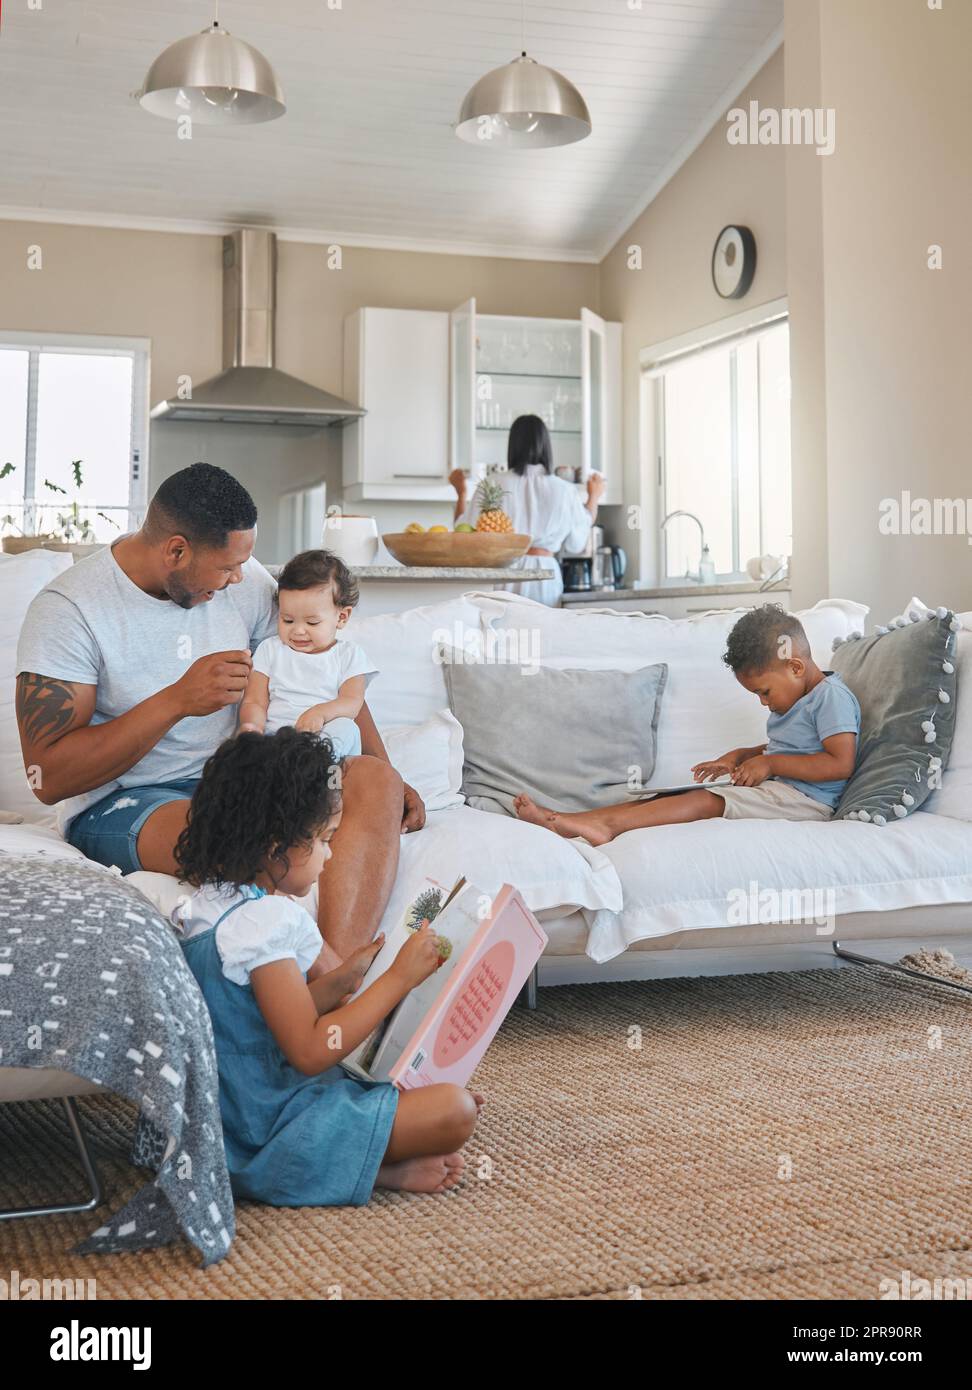 Typical Sundays. a young family relaxing together in the lounge at home. Stock Photo